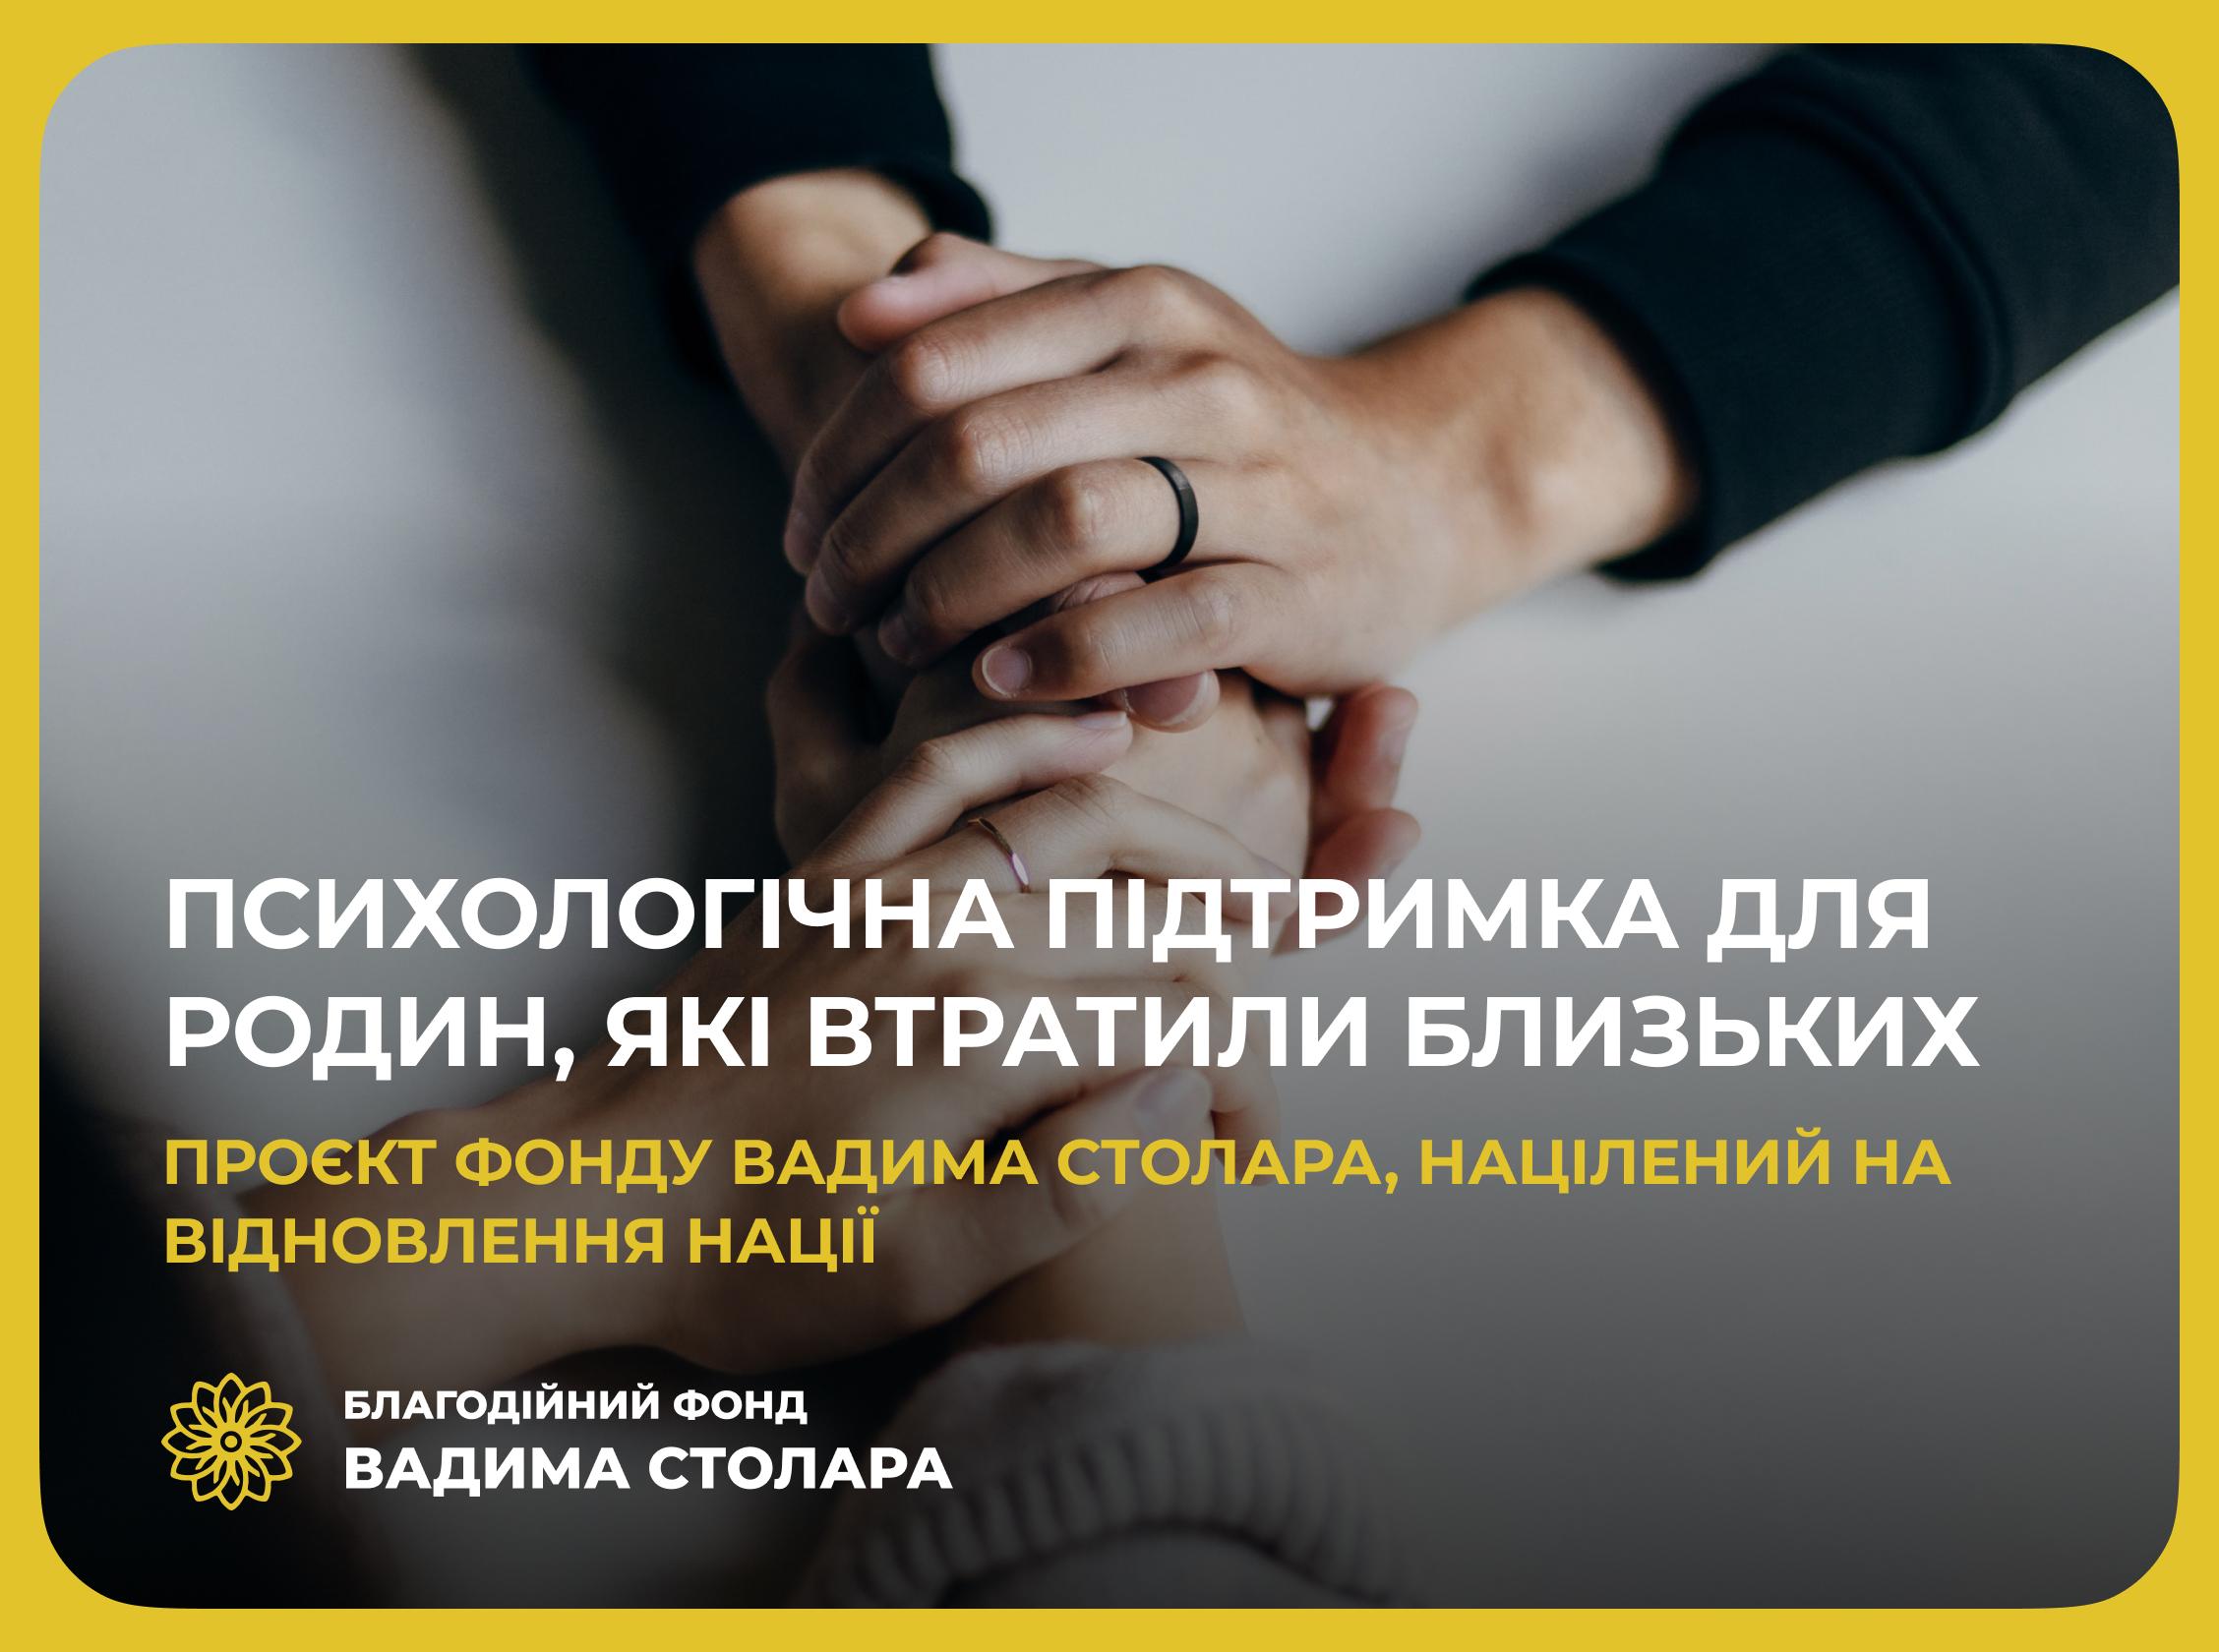 Psychological support for families who have lost loved ones is a project of the Vadym Stolar Foundation aimed at restori